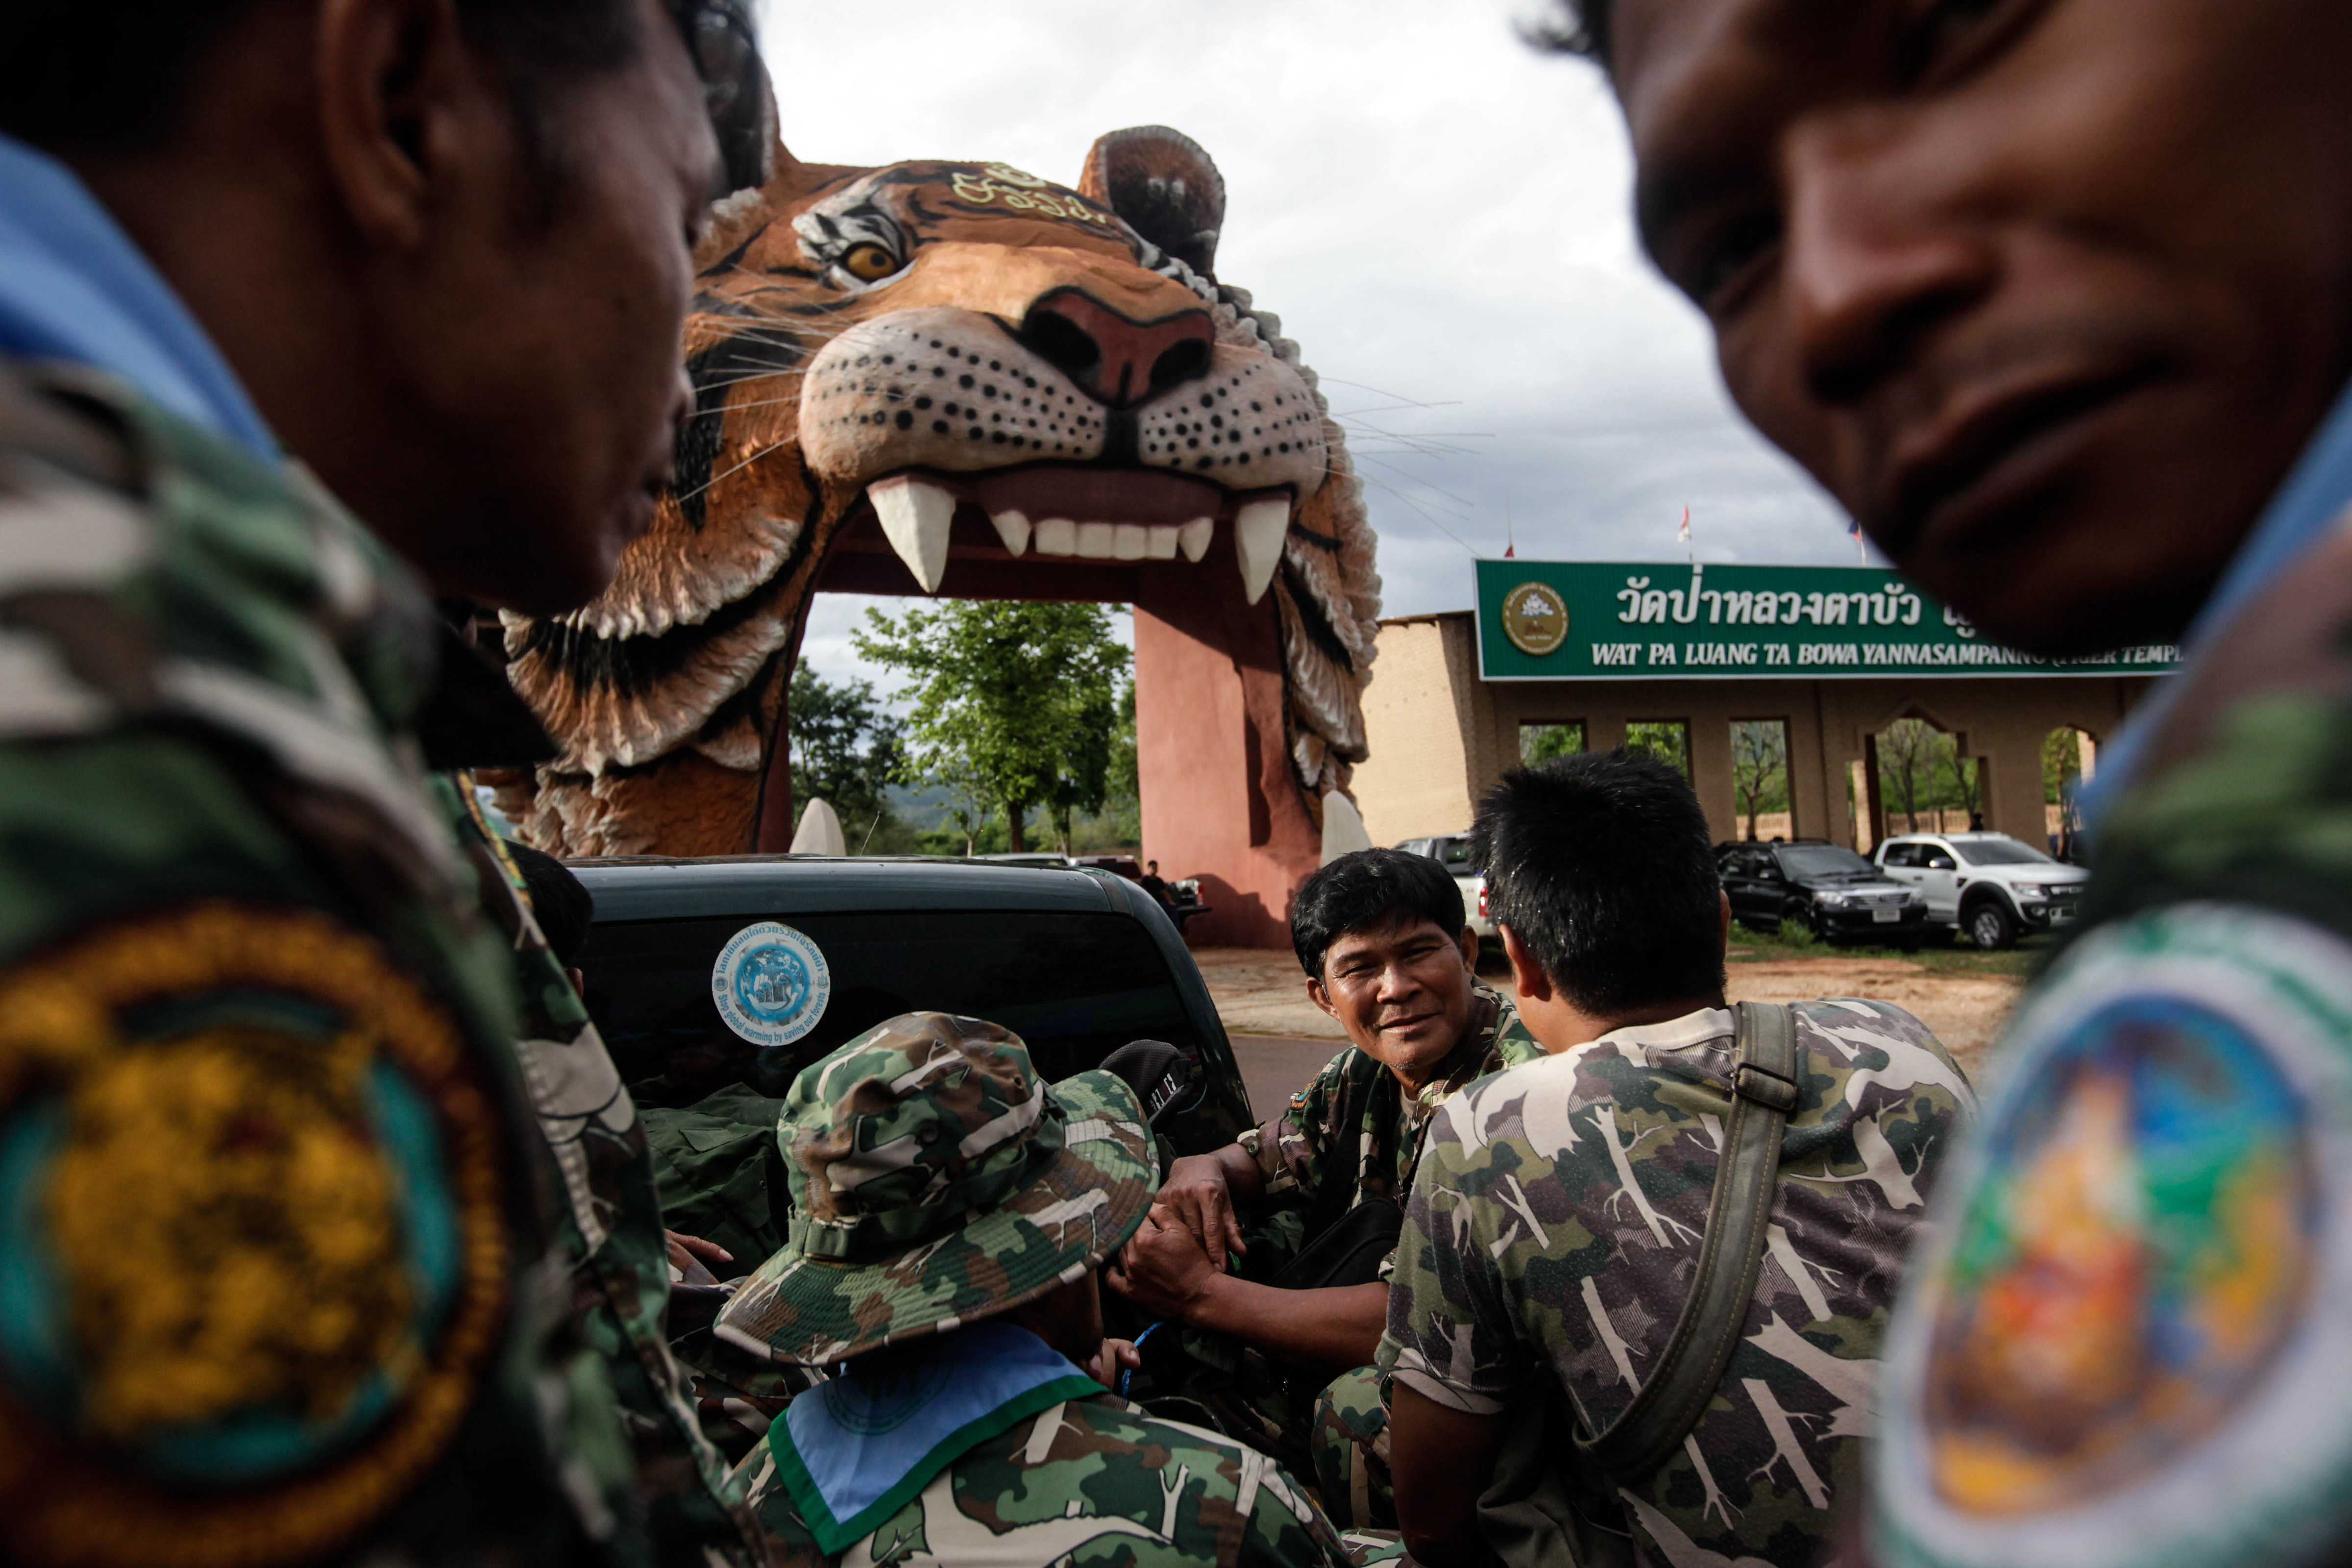 Thai DNP officers sit on a truck at the entrance of Wat Pha Luang Ta Bua Yanasampanno, or the Tiger Temple, on June 1, 2016, in Kanchanaburi province, Thailand. Wildlife authorities in Thailand have shut the temple down following accusations the monks were illegally breeding and trafficking endangered animals (Dario Pignatelli—Getty Images)